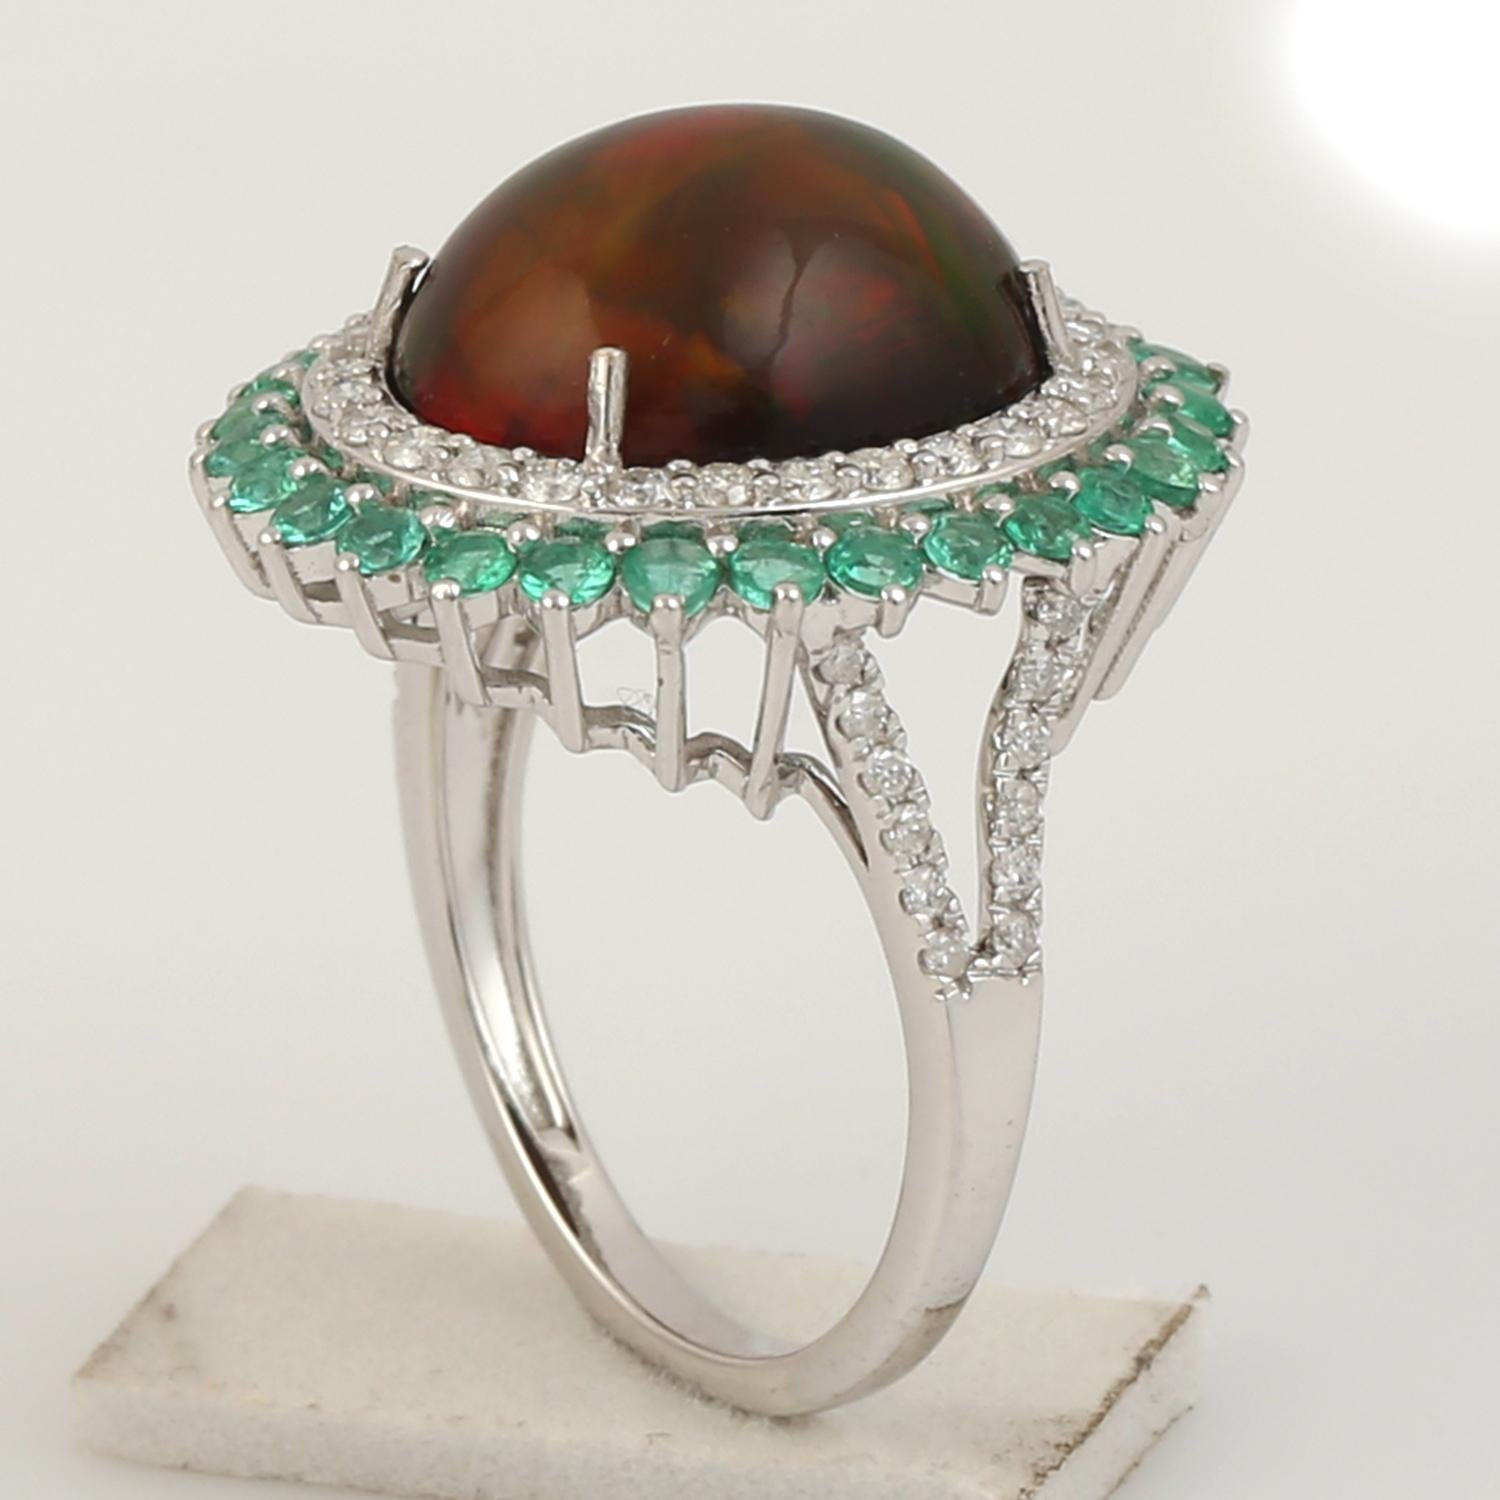 Mixed Cut Oval Shped Opal Ring With Emerald & Pave Diamonds Made In 18K White Gold For Sale